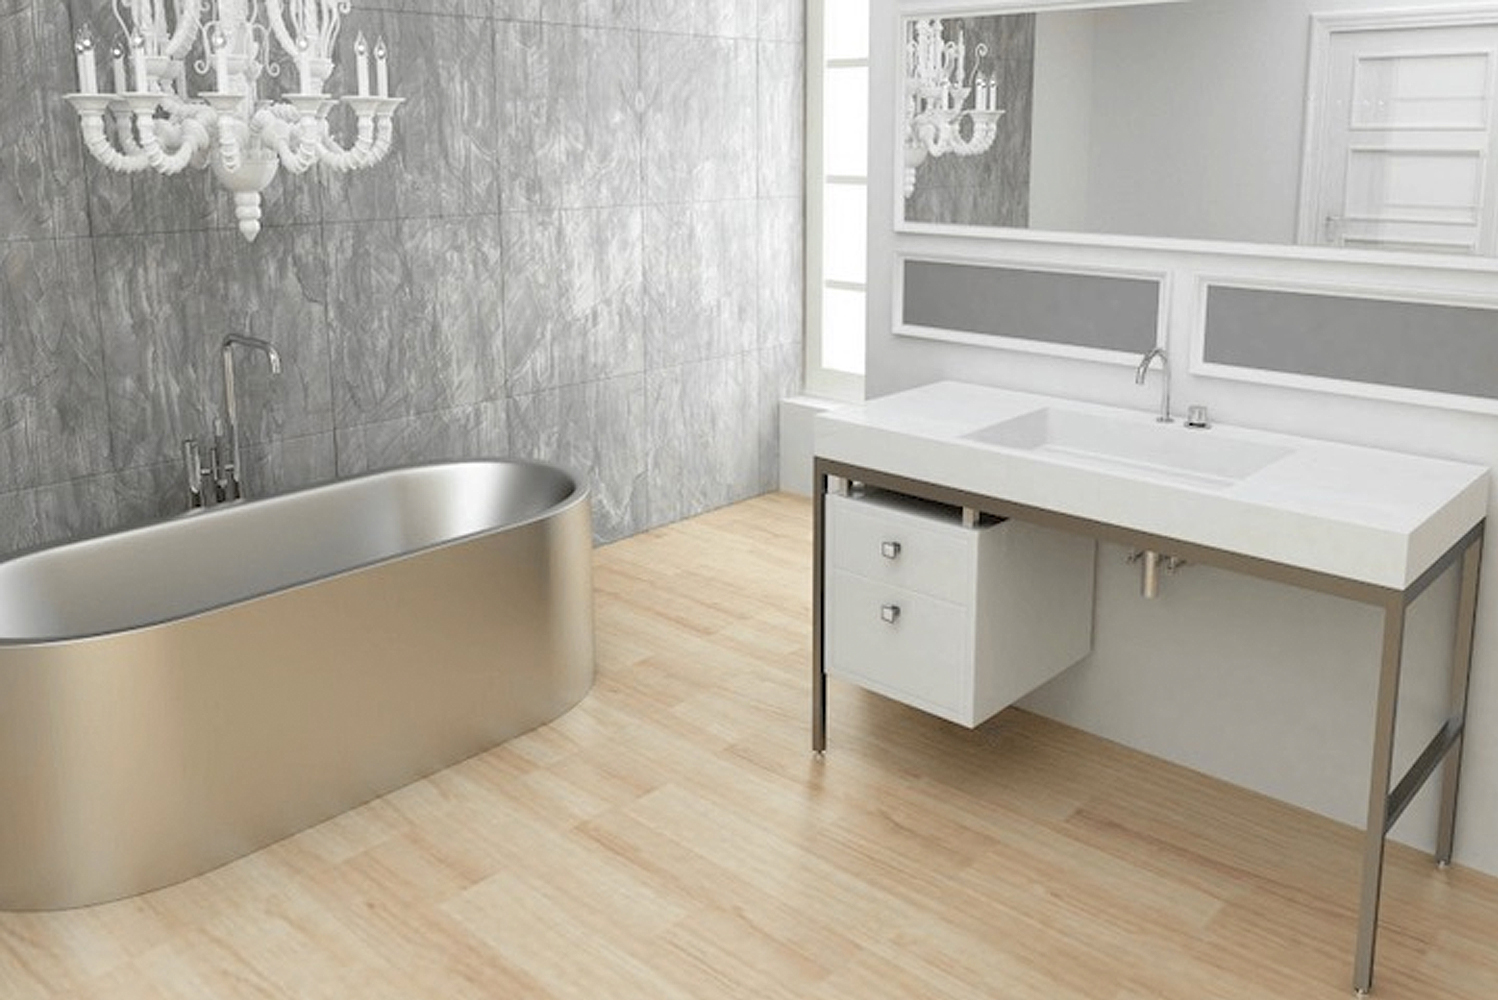 Constructed of heavy-gauge type 304 stainless steel the Neo tub is available in two sizes 